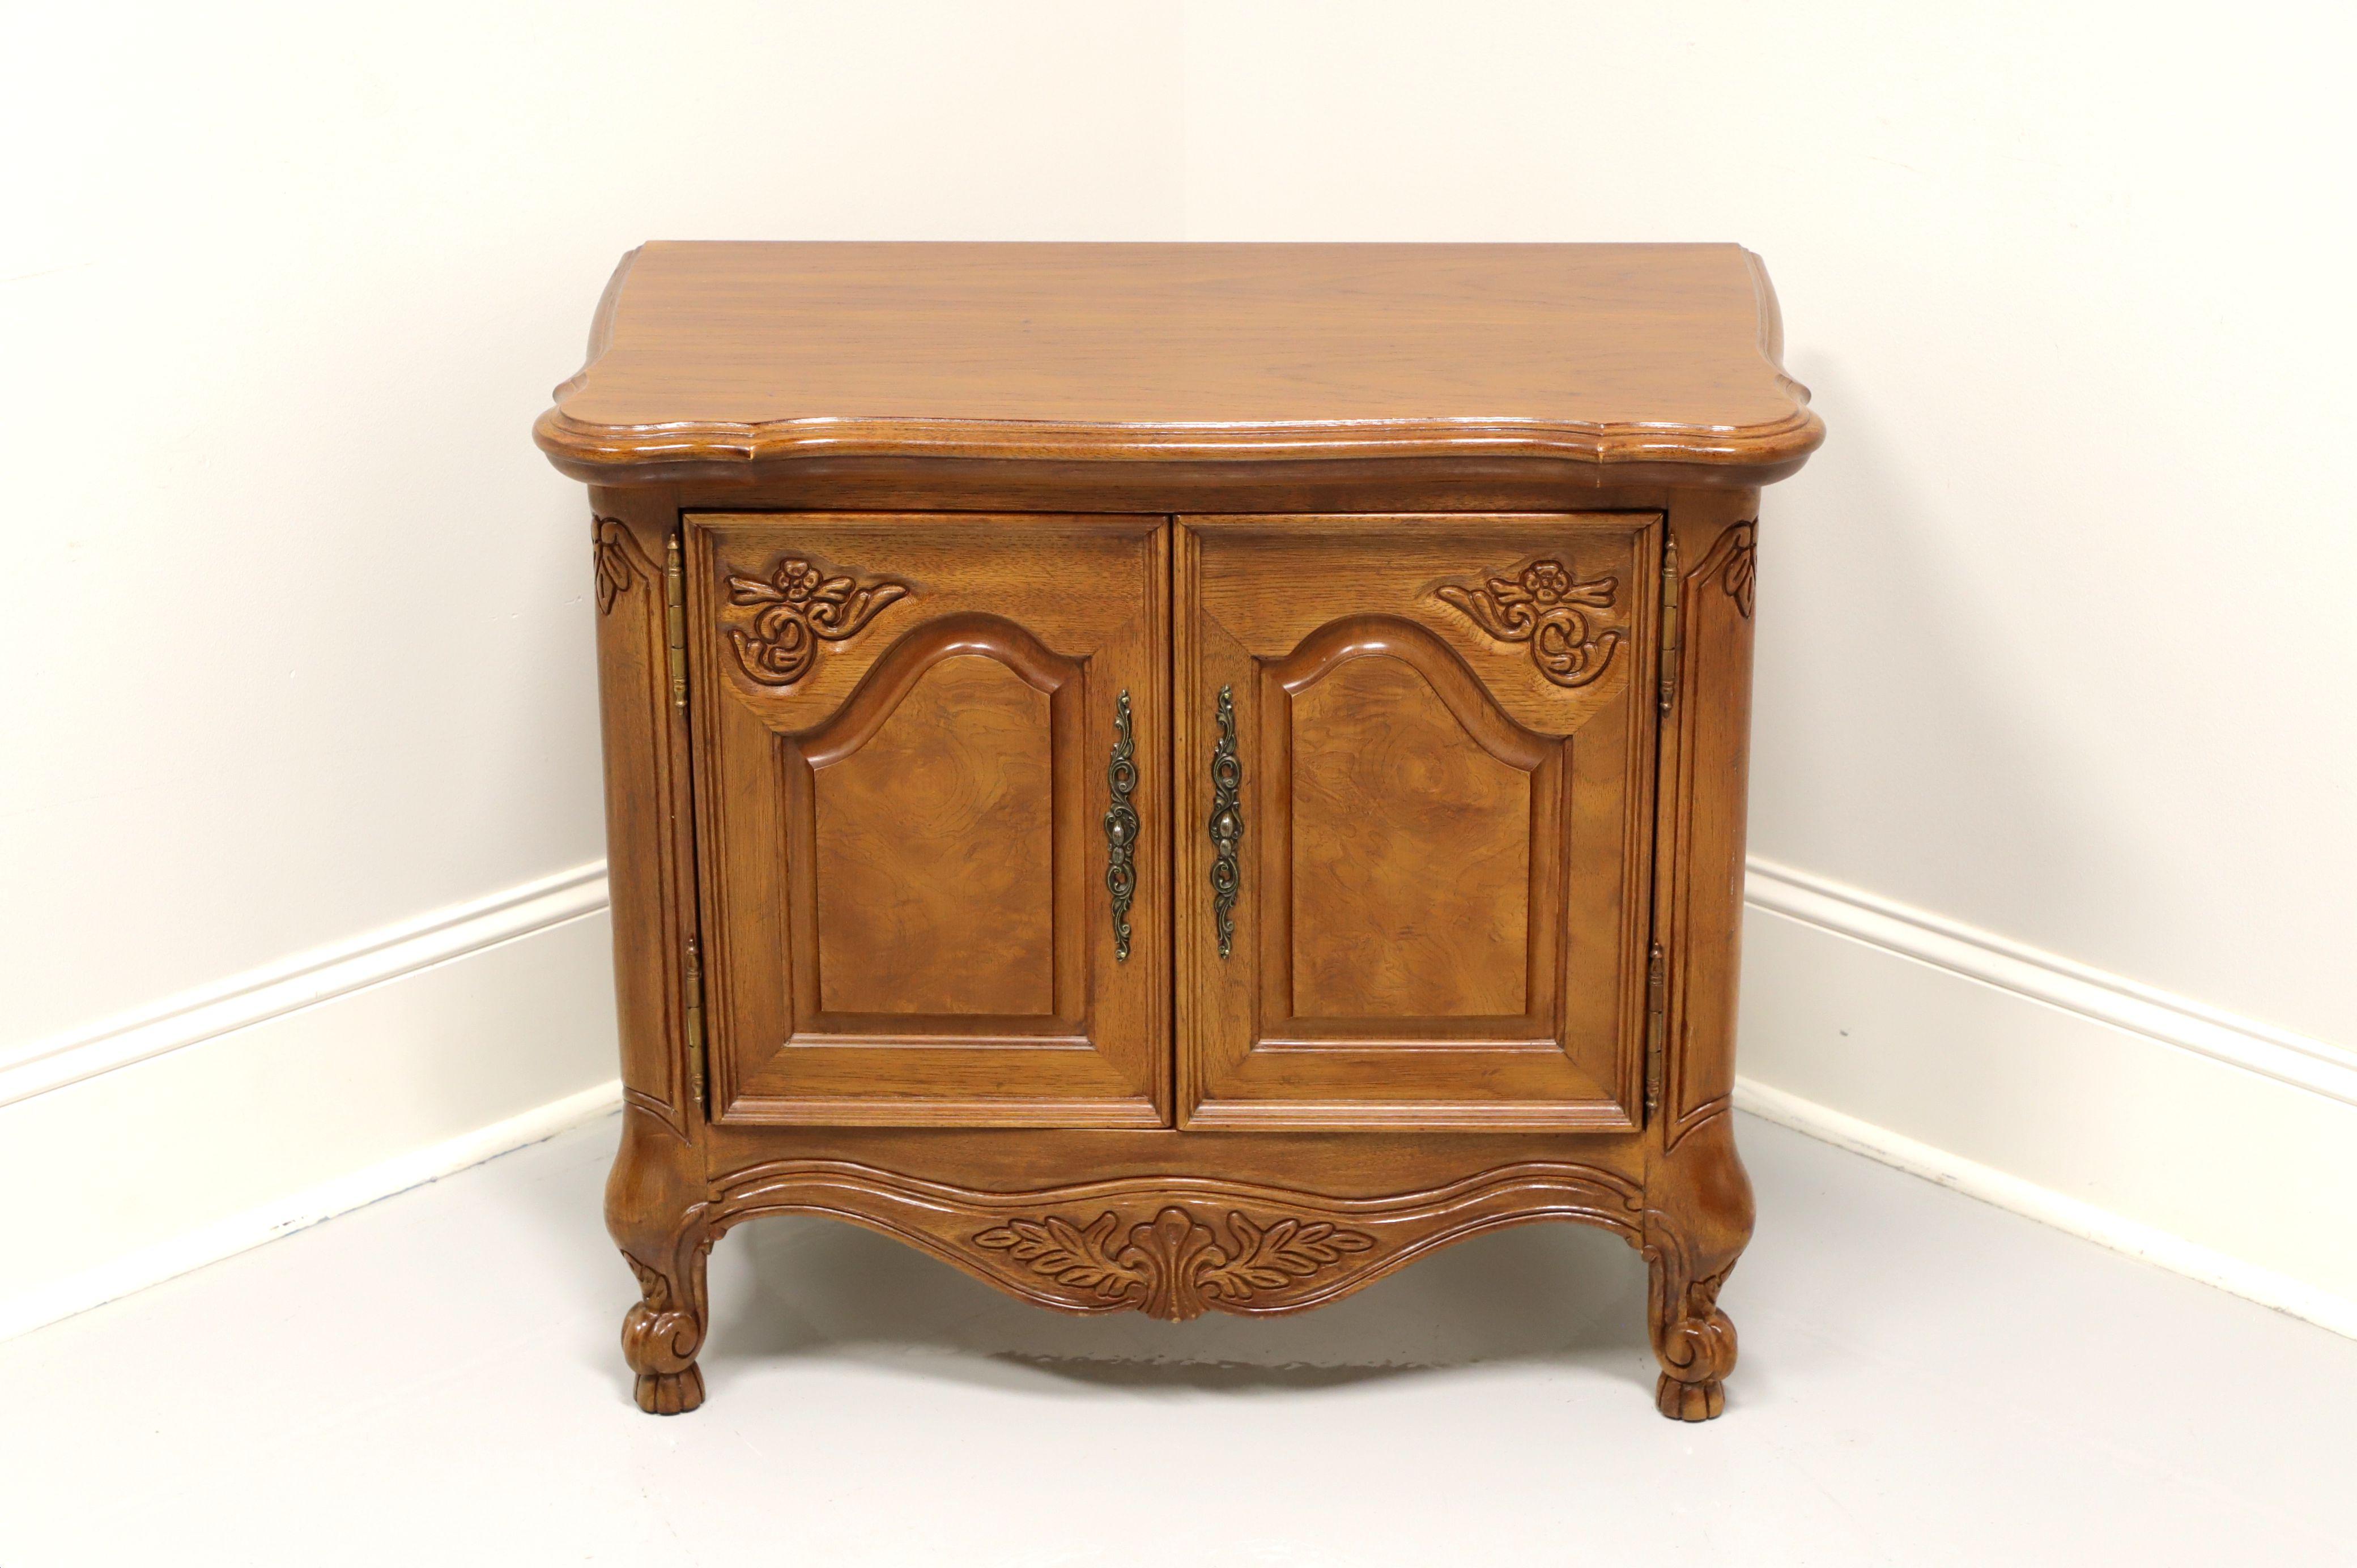 A French Country style nightstand by Lexington, from their Chateau Latour Collection. Walnut with brass hardware, curved front, carved apron and scroll feet. Features two door cabinet revealing one drawer of dovetail construction and storage area.